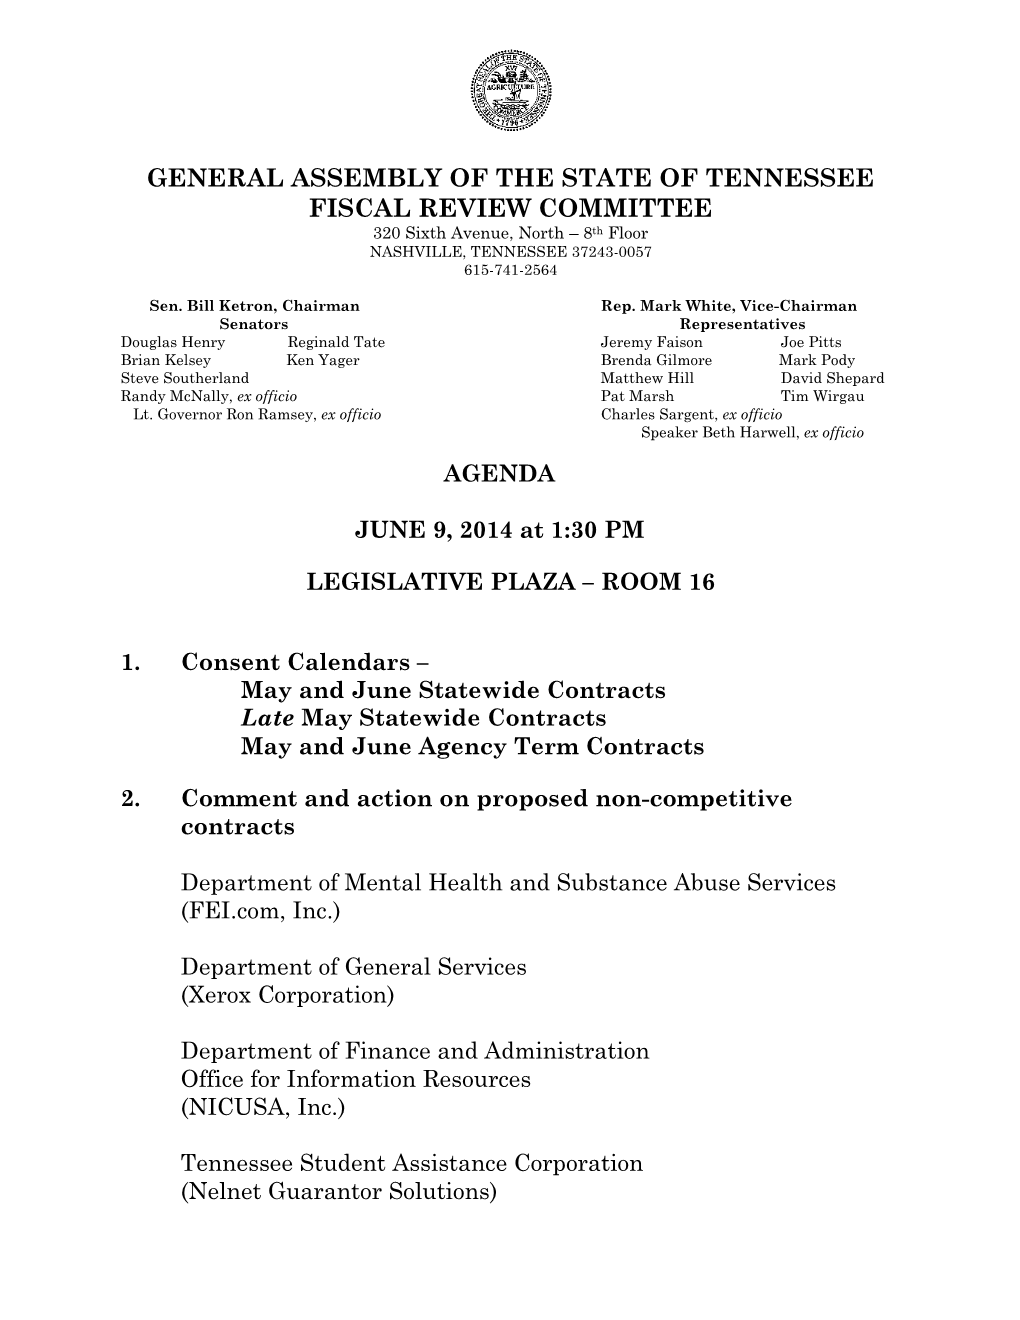 GENERAL ASSEMBLY of the STATE of TENNESSEE FISCAL REVIEW COMMITTEE 320 Sixth Avenue, North – 8Th Floor NASHVILLE, TENNESSEE 37243-0057 615-741-2564